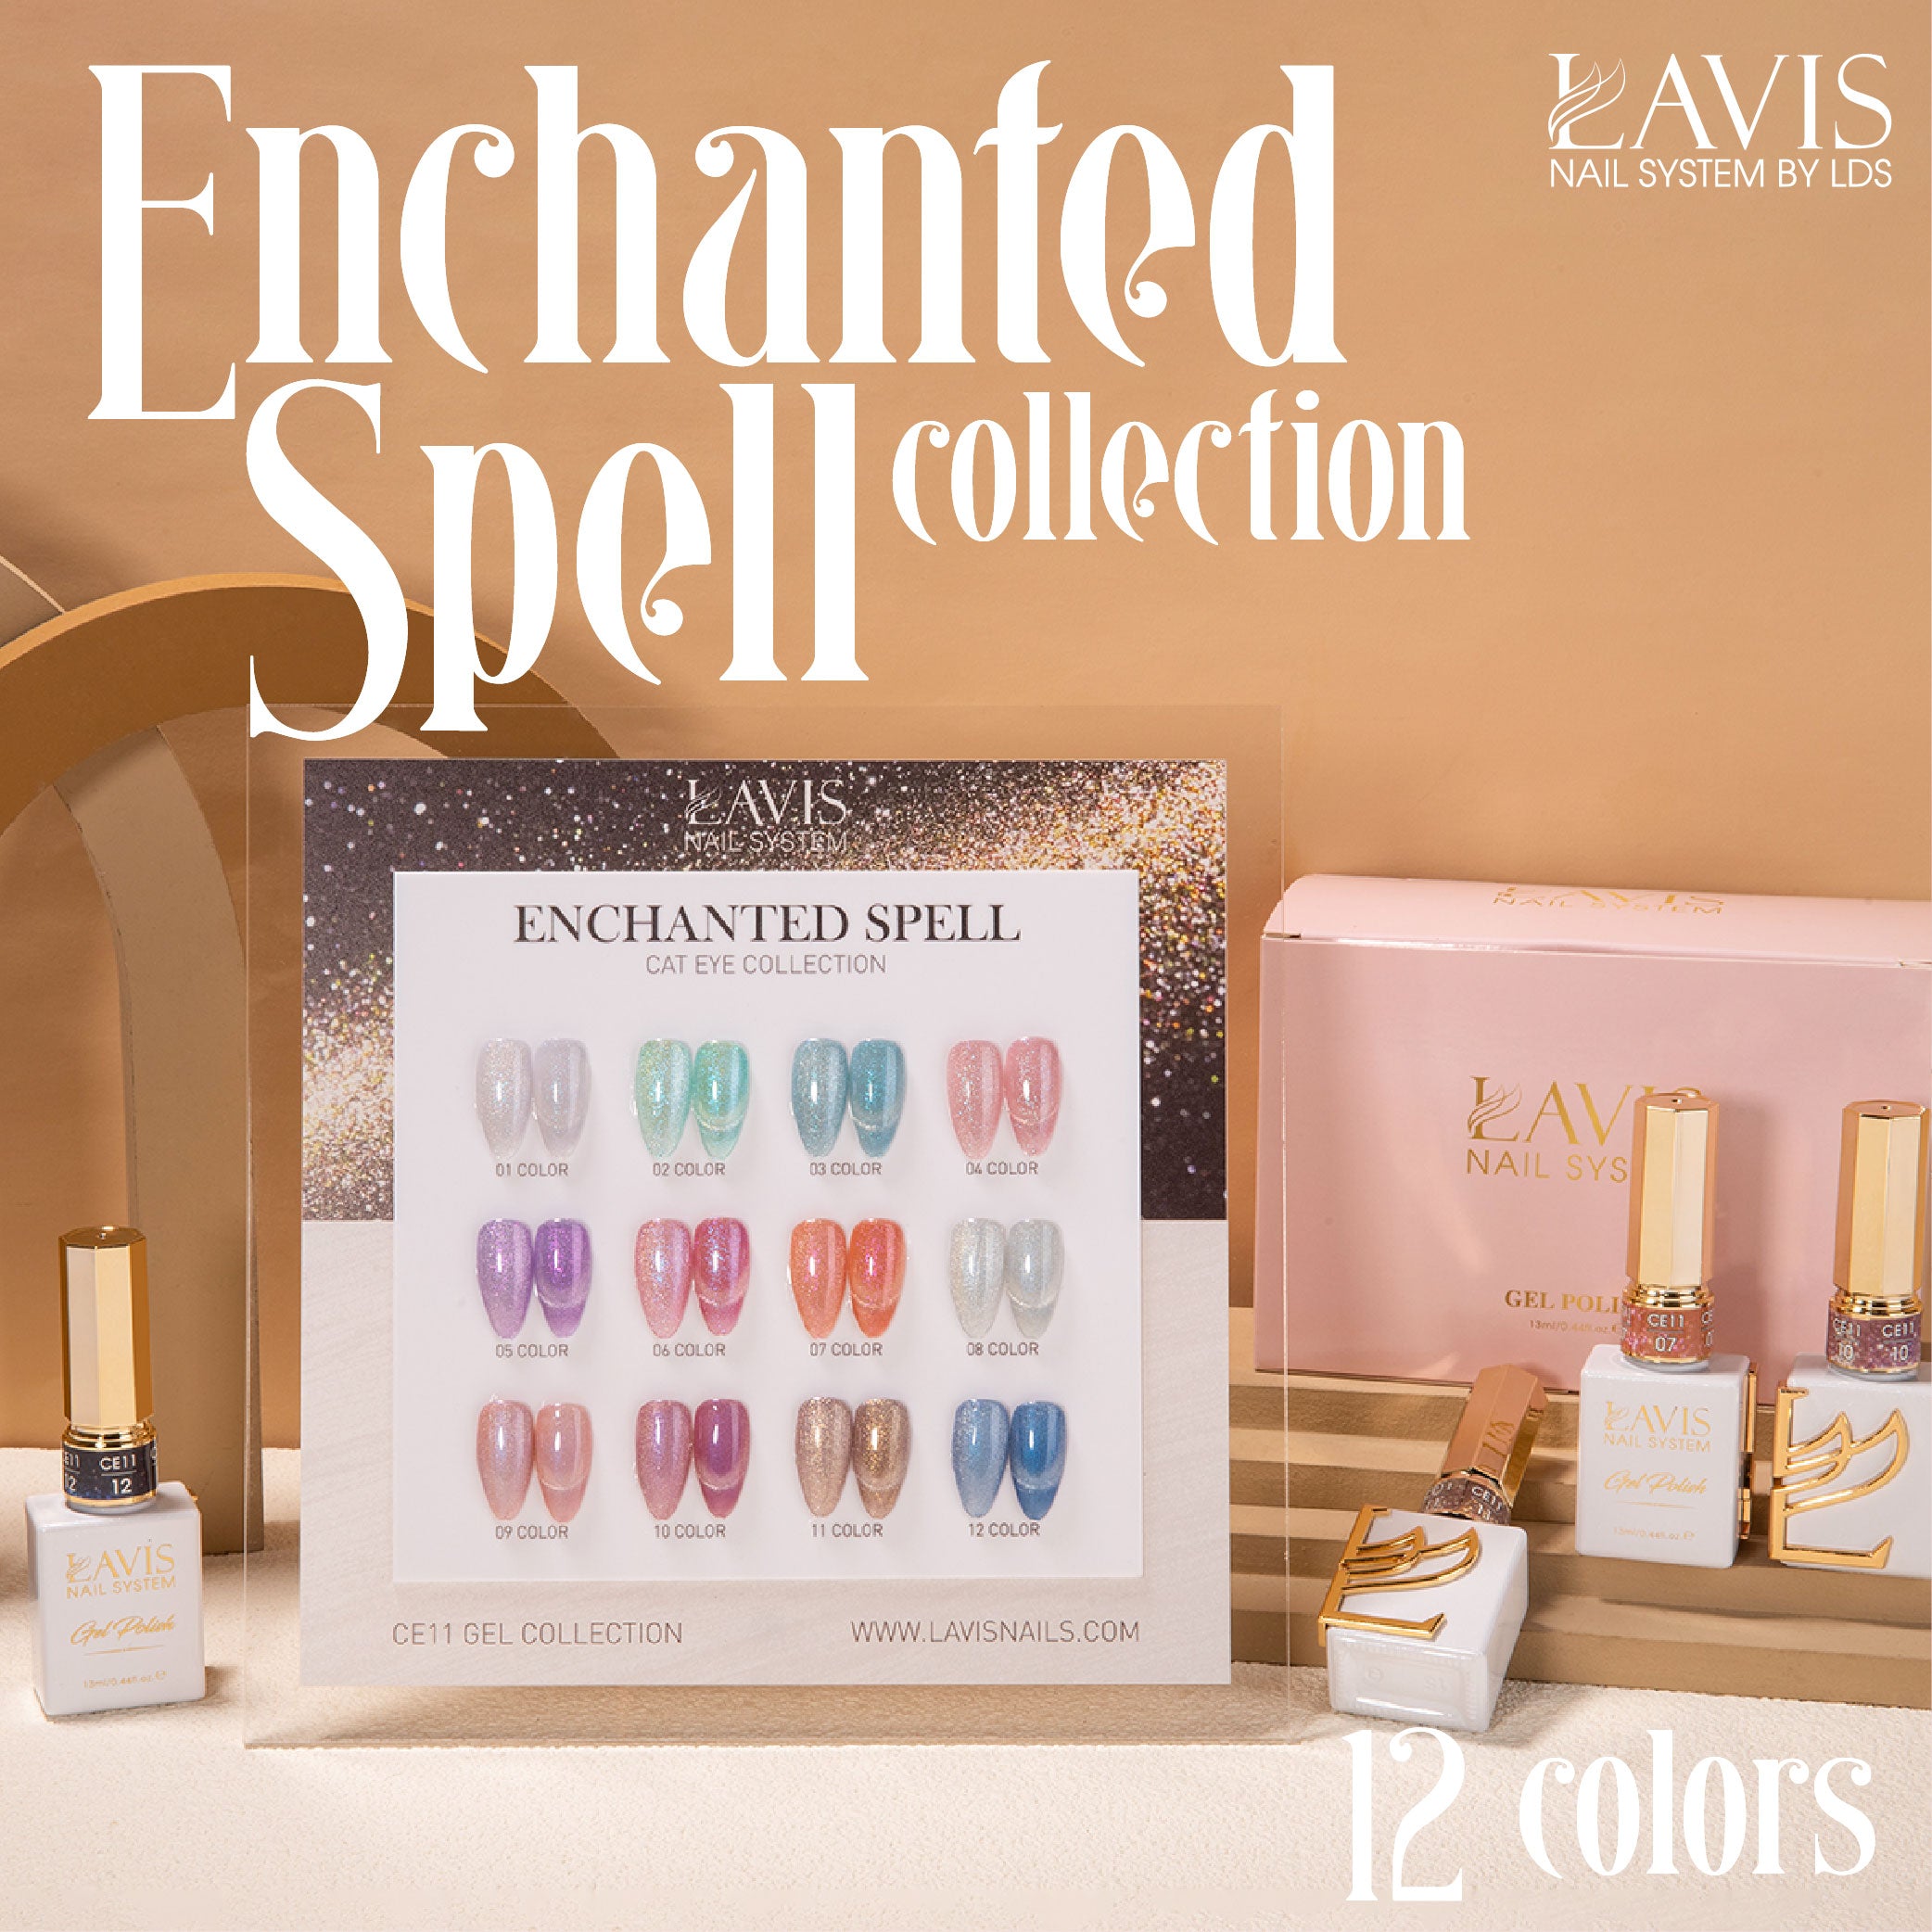 LAVIS Cat Eyes CE11 - 11 - Gel Polish 0.5 oz - Enchanted Spell Collection